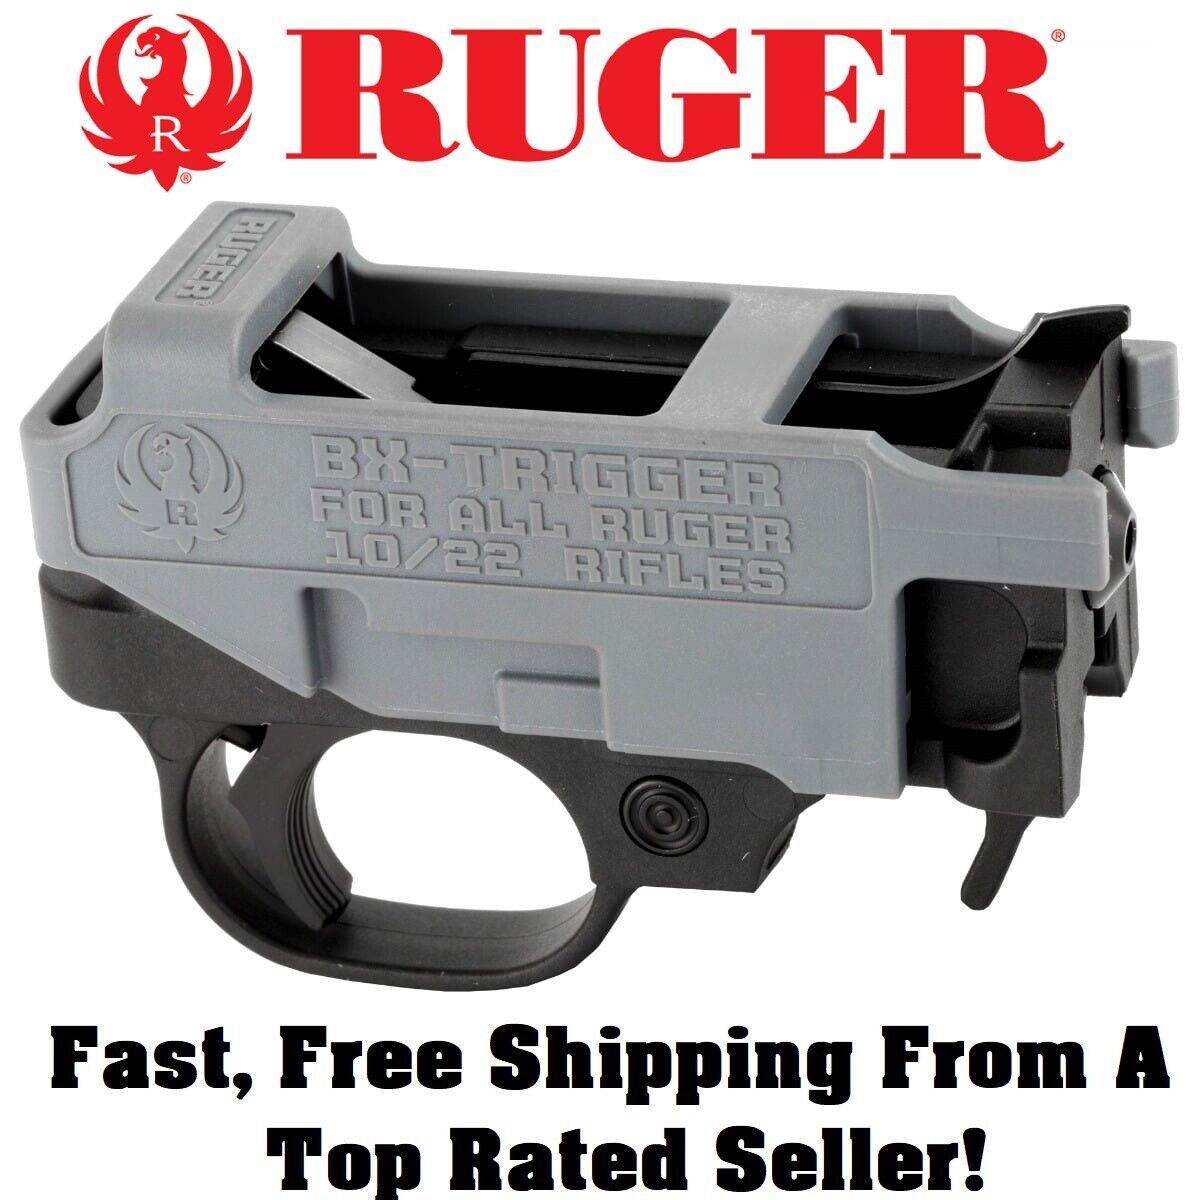 Ruger BX TRIGGER -Drop In Replacement for all 10/22 Rifles & 22 Charger Pistols